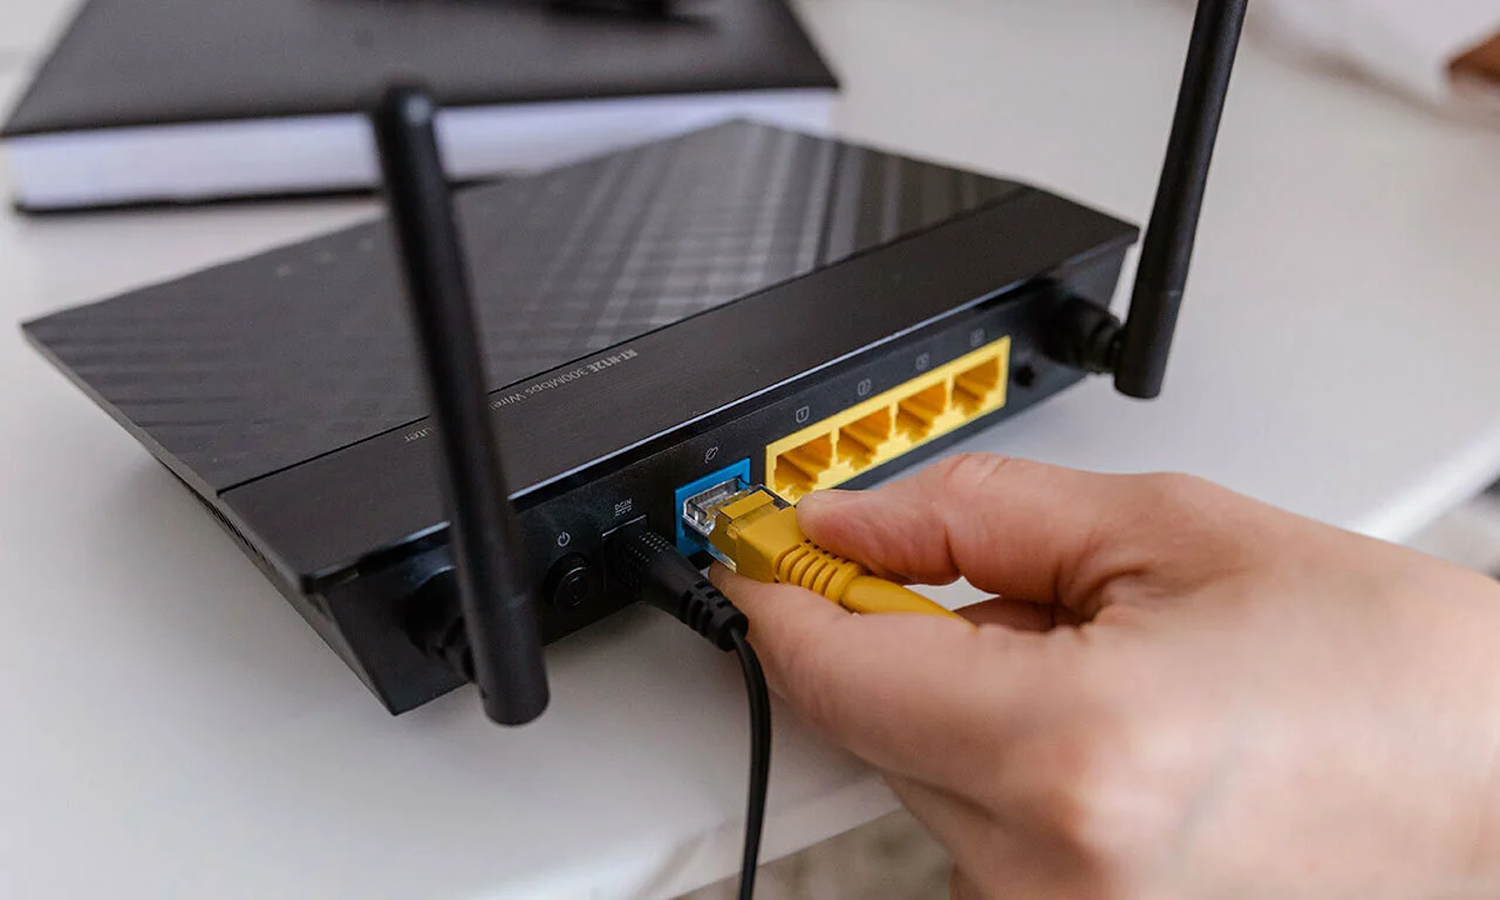 wired ethernet connection